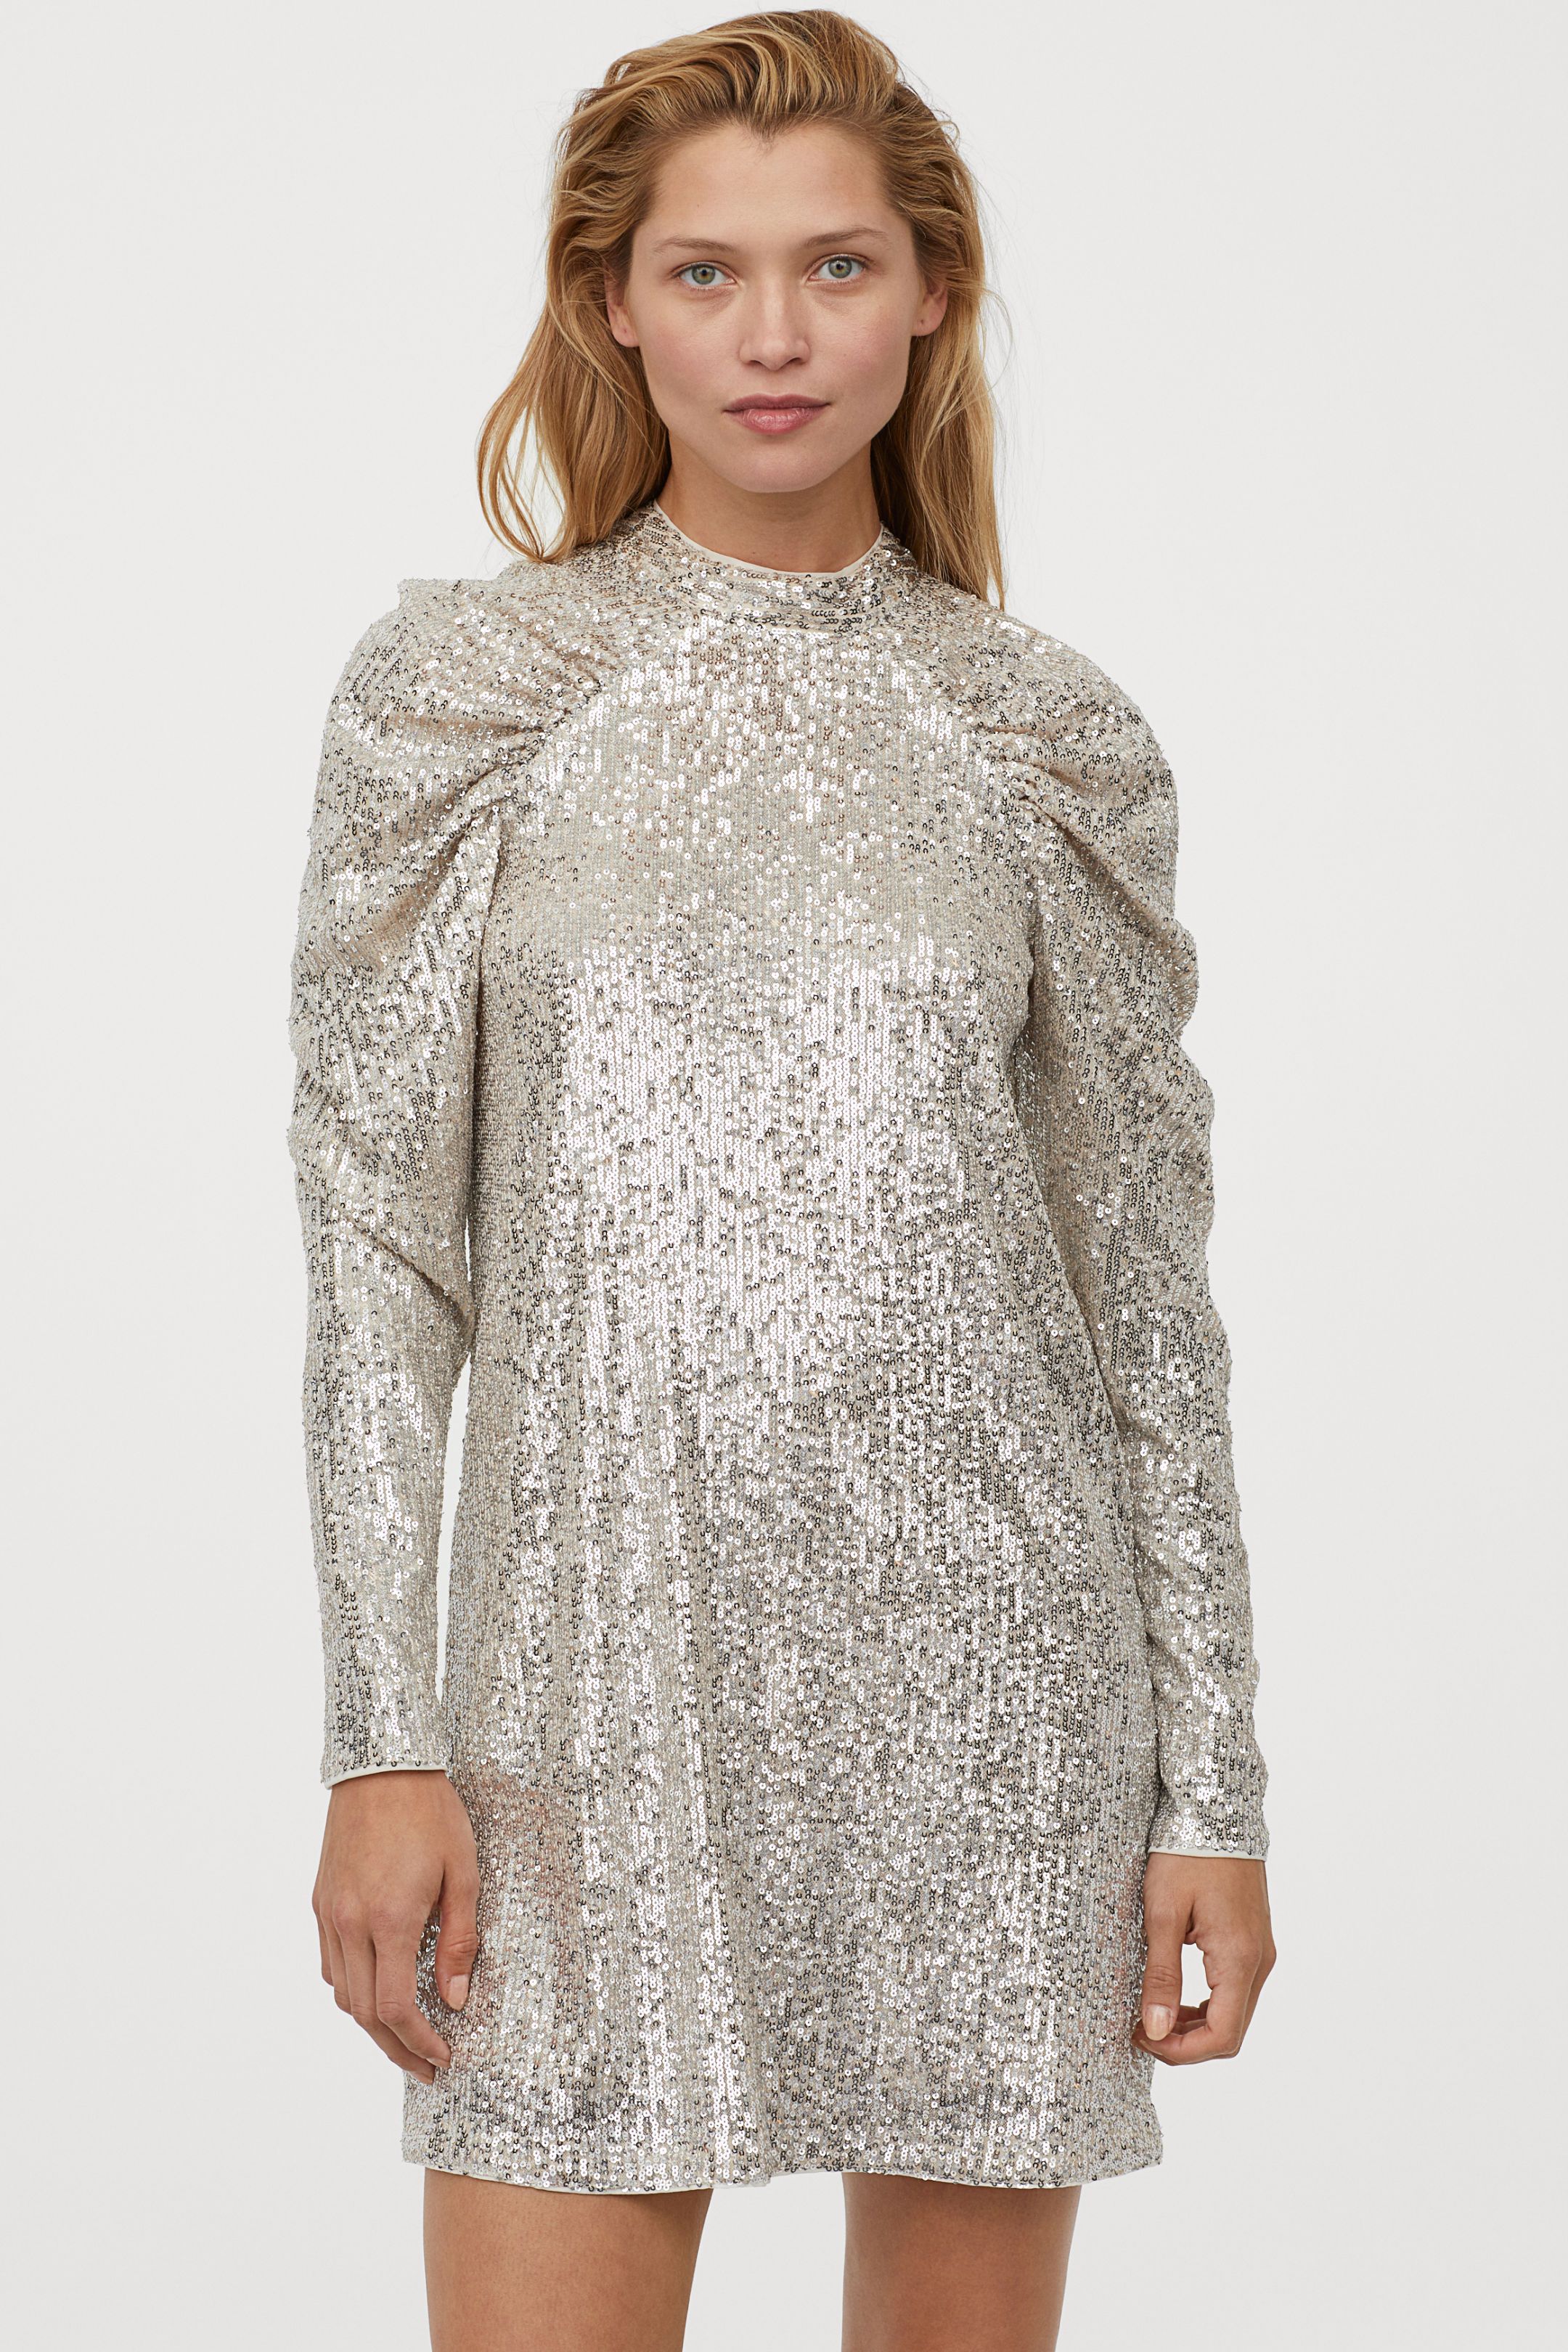 silver sparkly dresses uk